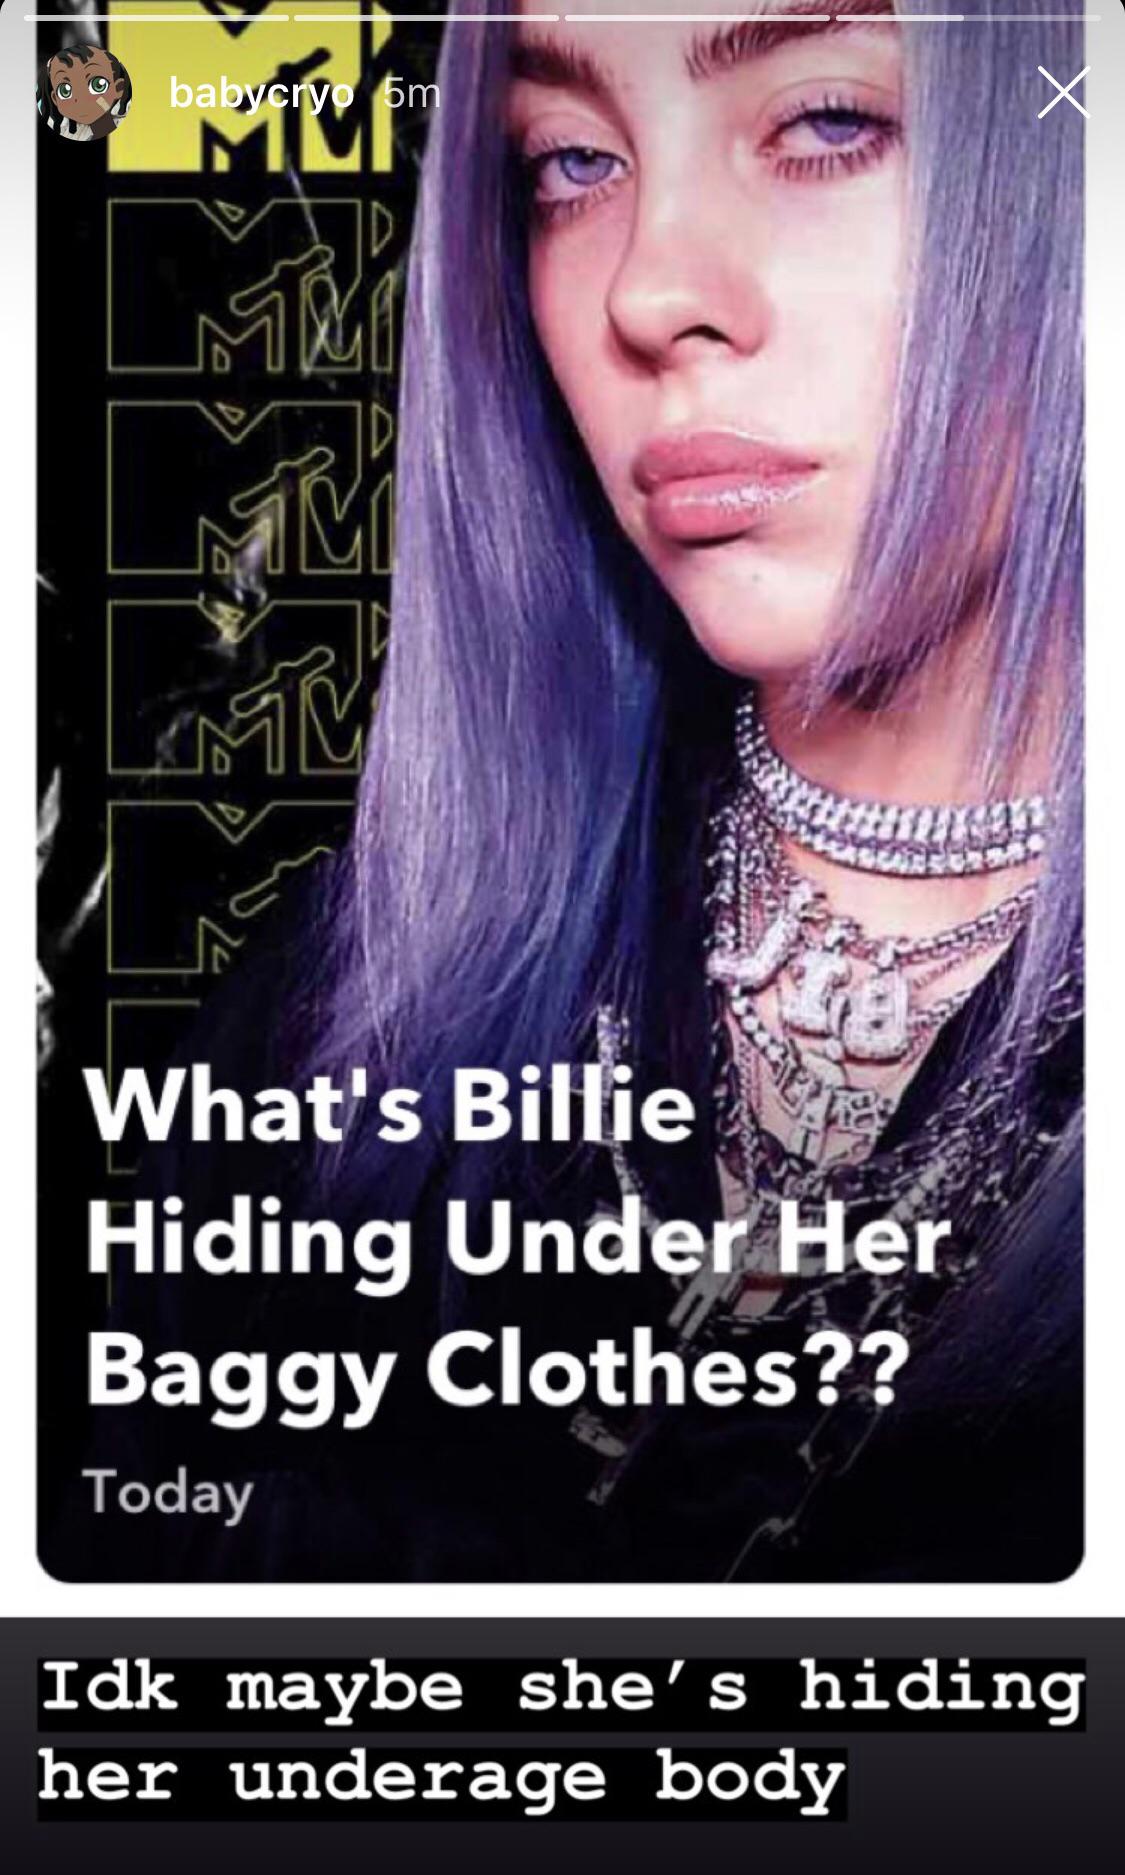 billie eilish clothes reddit - o babycryo 6m What's Billie Hiding Under Her Baggy Clothes?? Today Idk maybe she's hiding her underage body